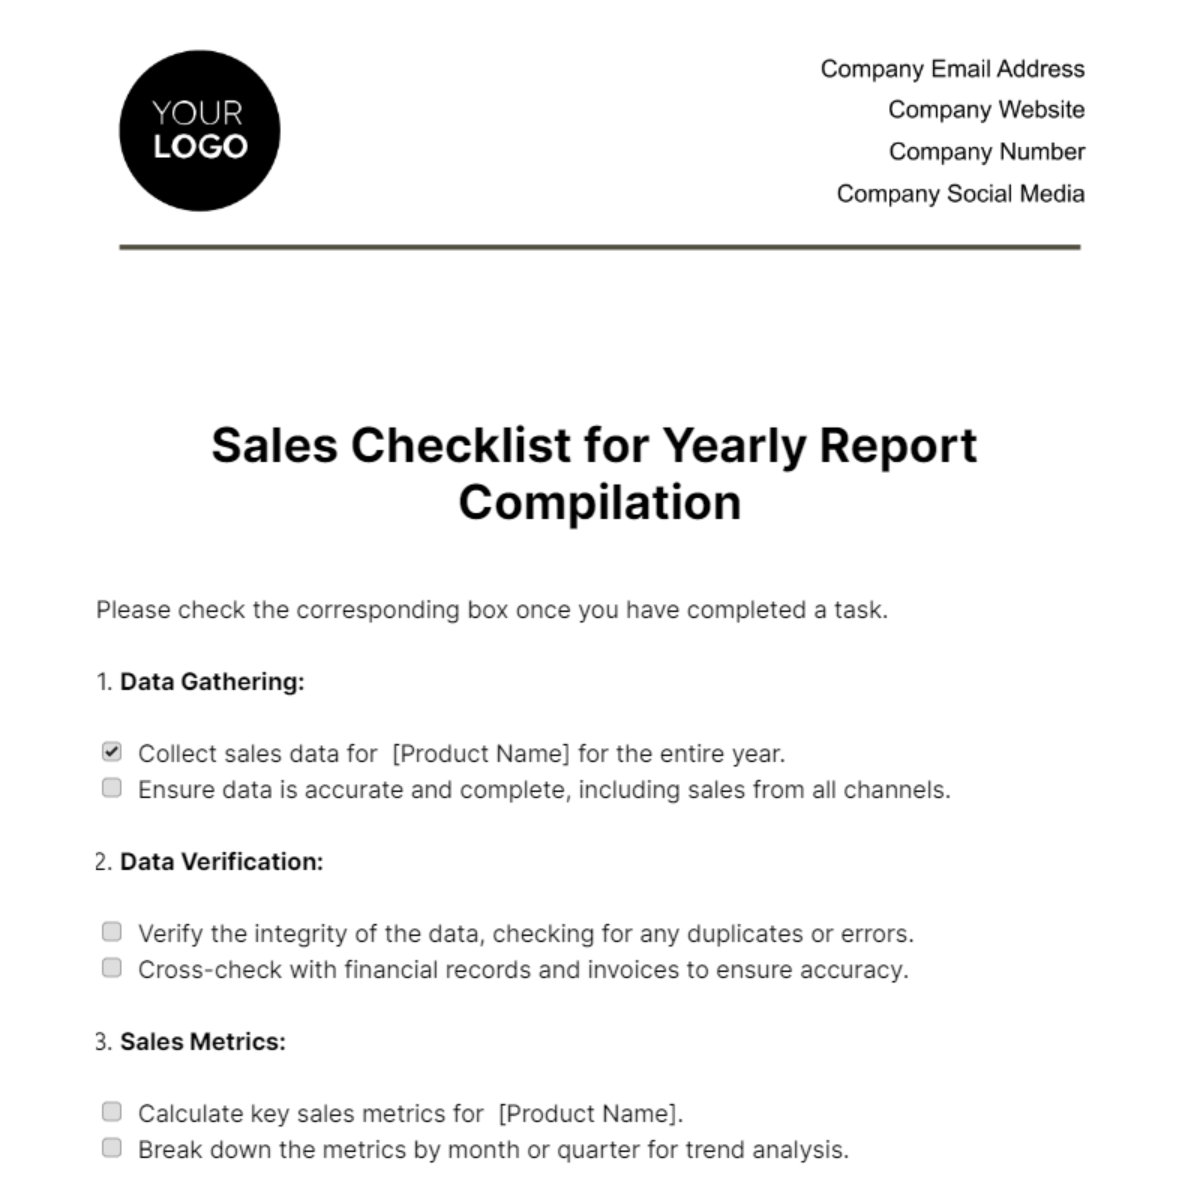 Free Sales Checklist for Yearly Report Compilation Template